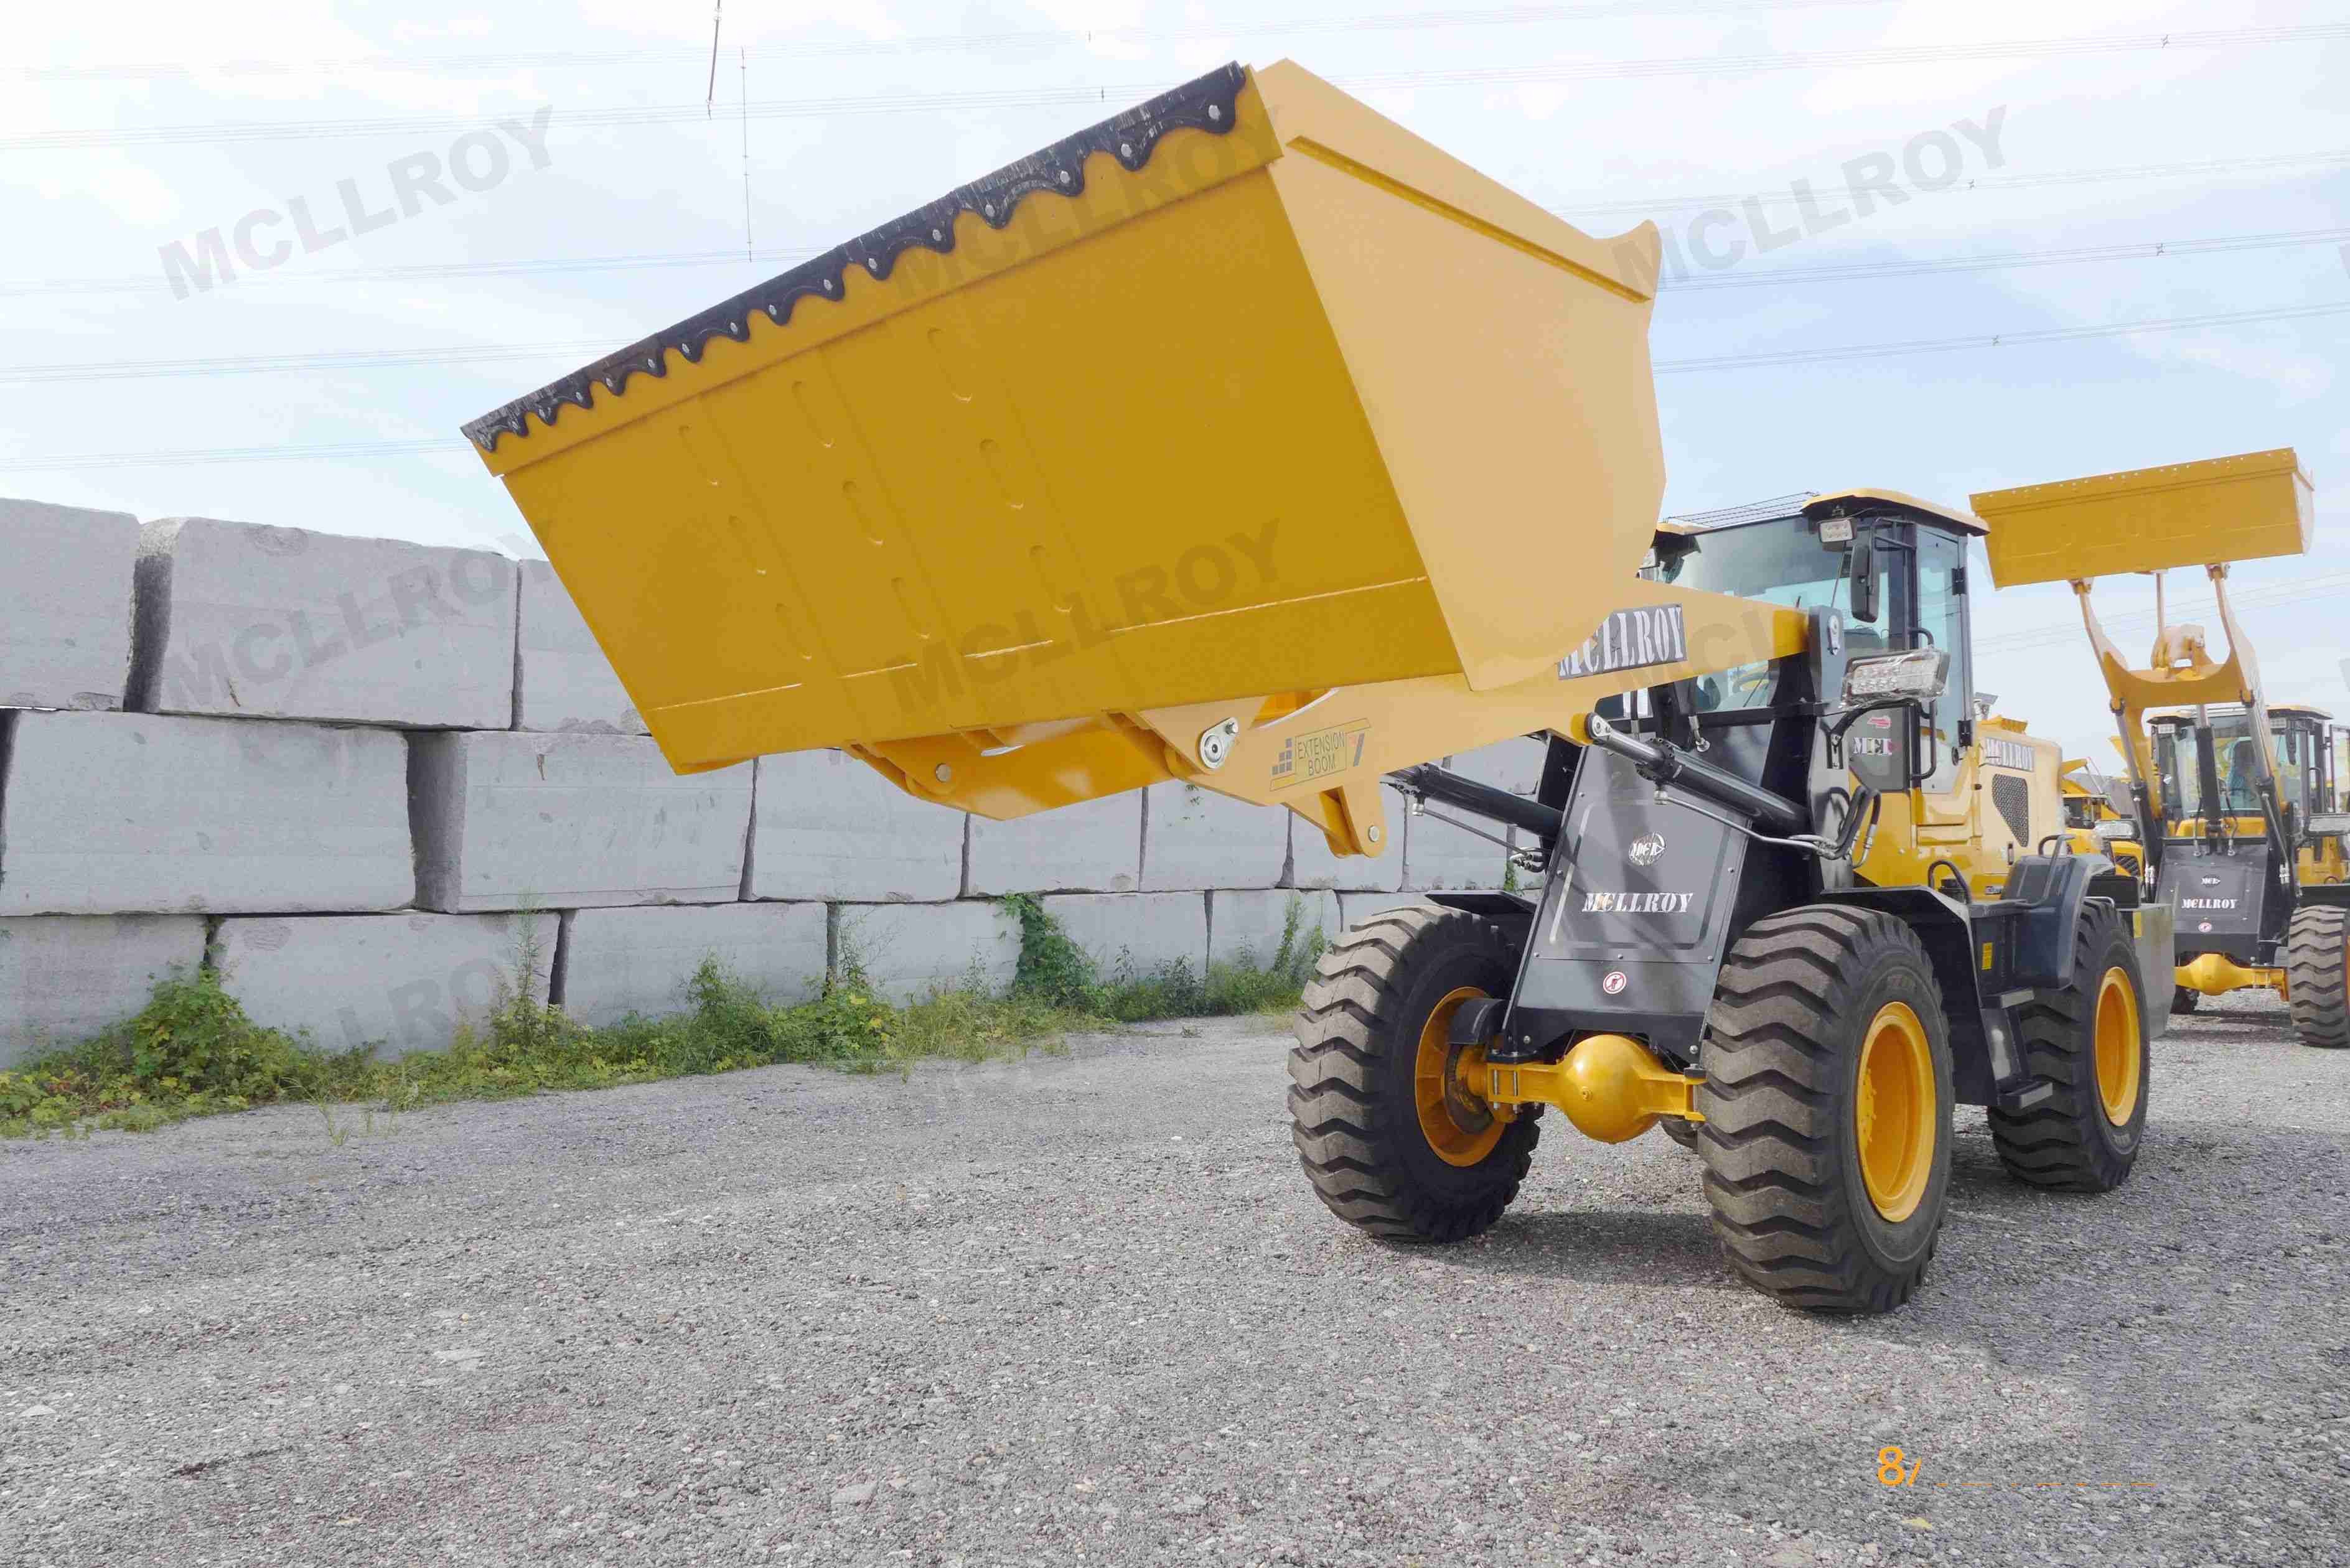 92 Kw Heavy 2400 Rpm Small Wheel Loaders Machinery